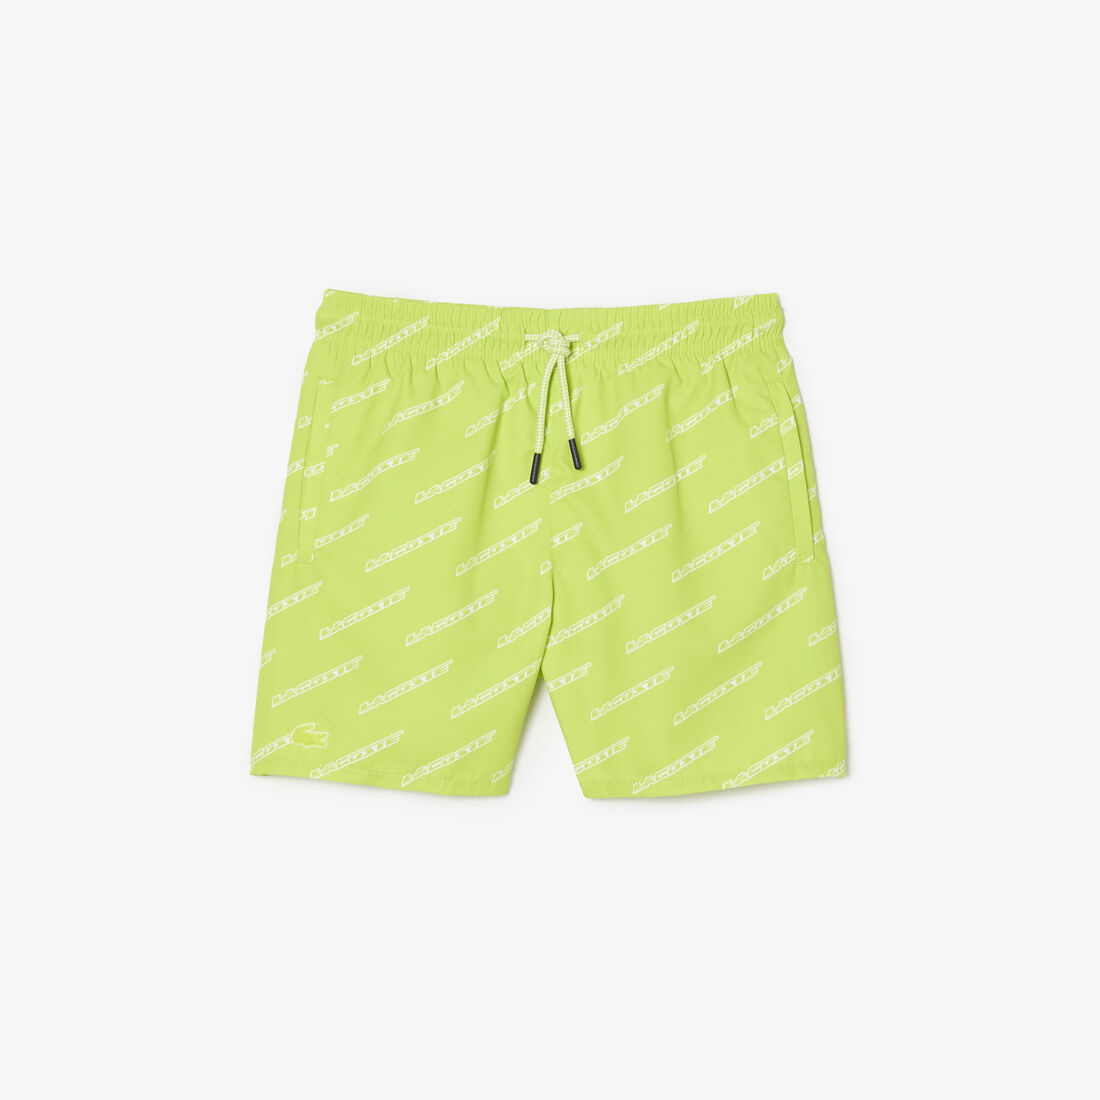 Boys’ Lacoste Printed Recycled Polyester Swim Trunks